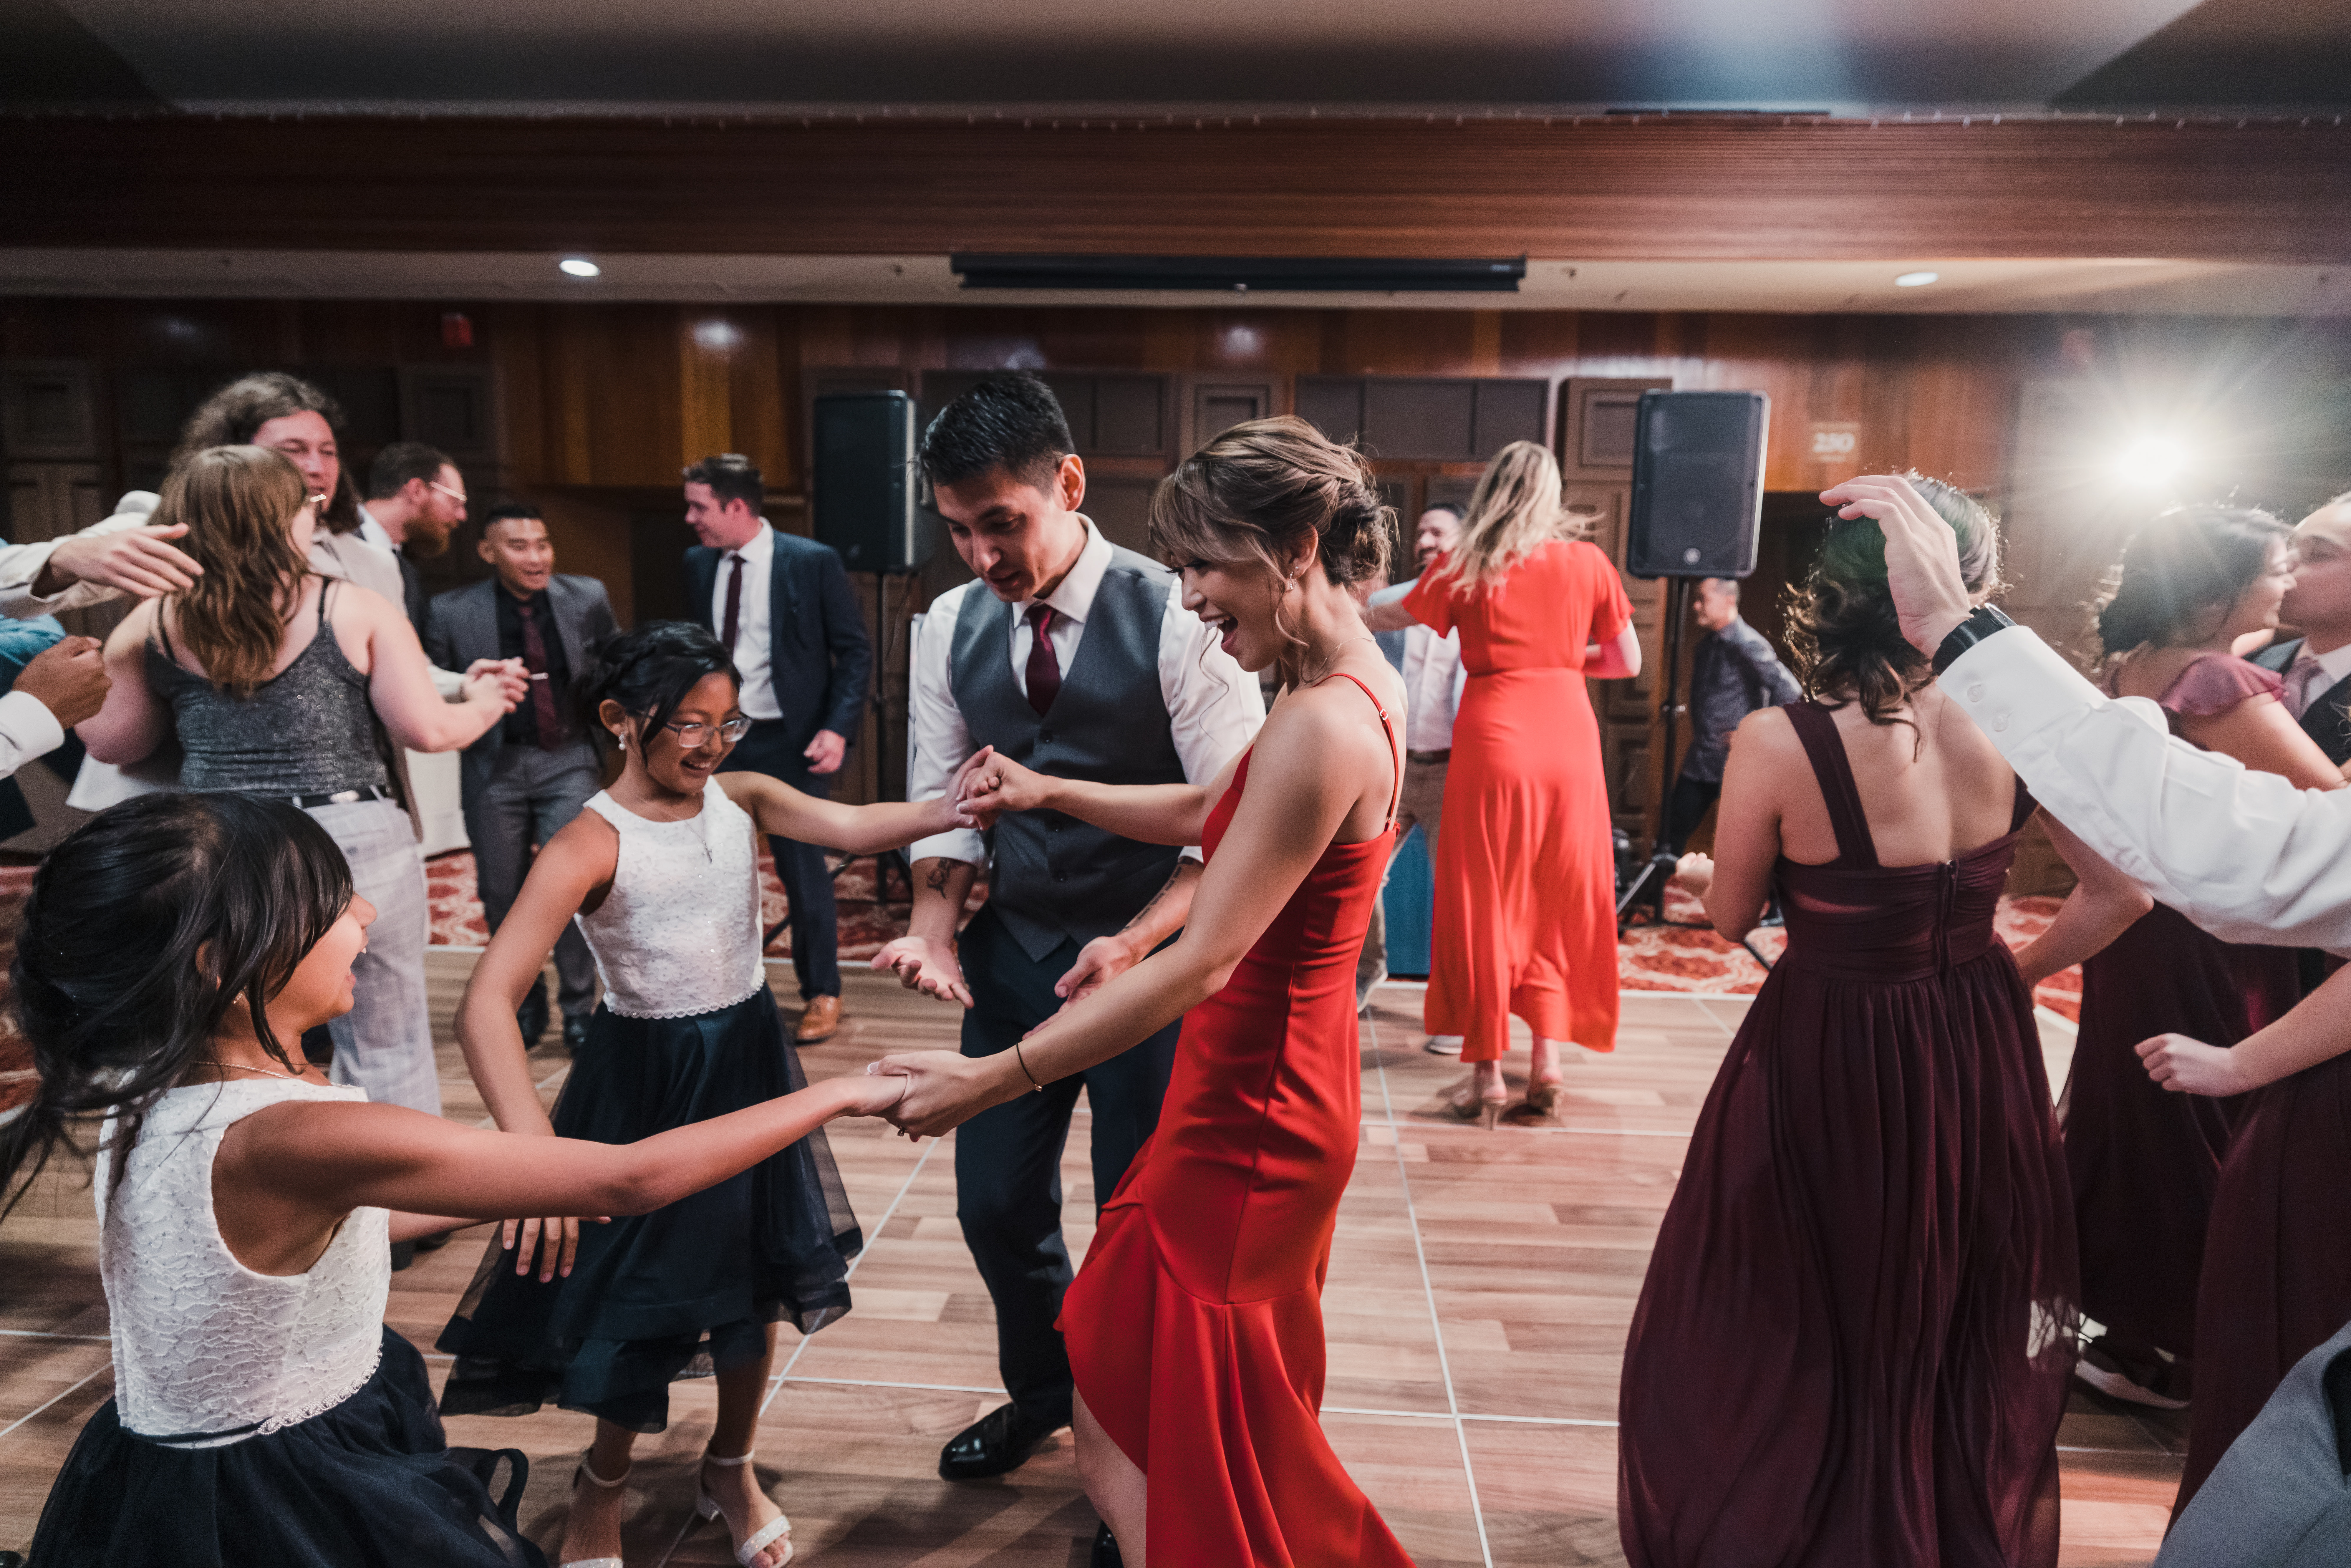 bride in red reception dress and groom dance with guests